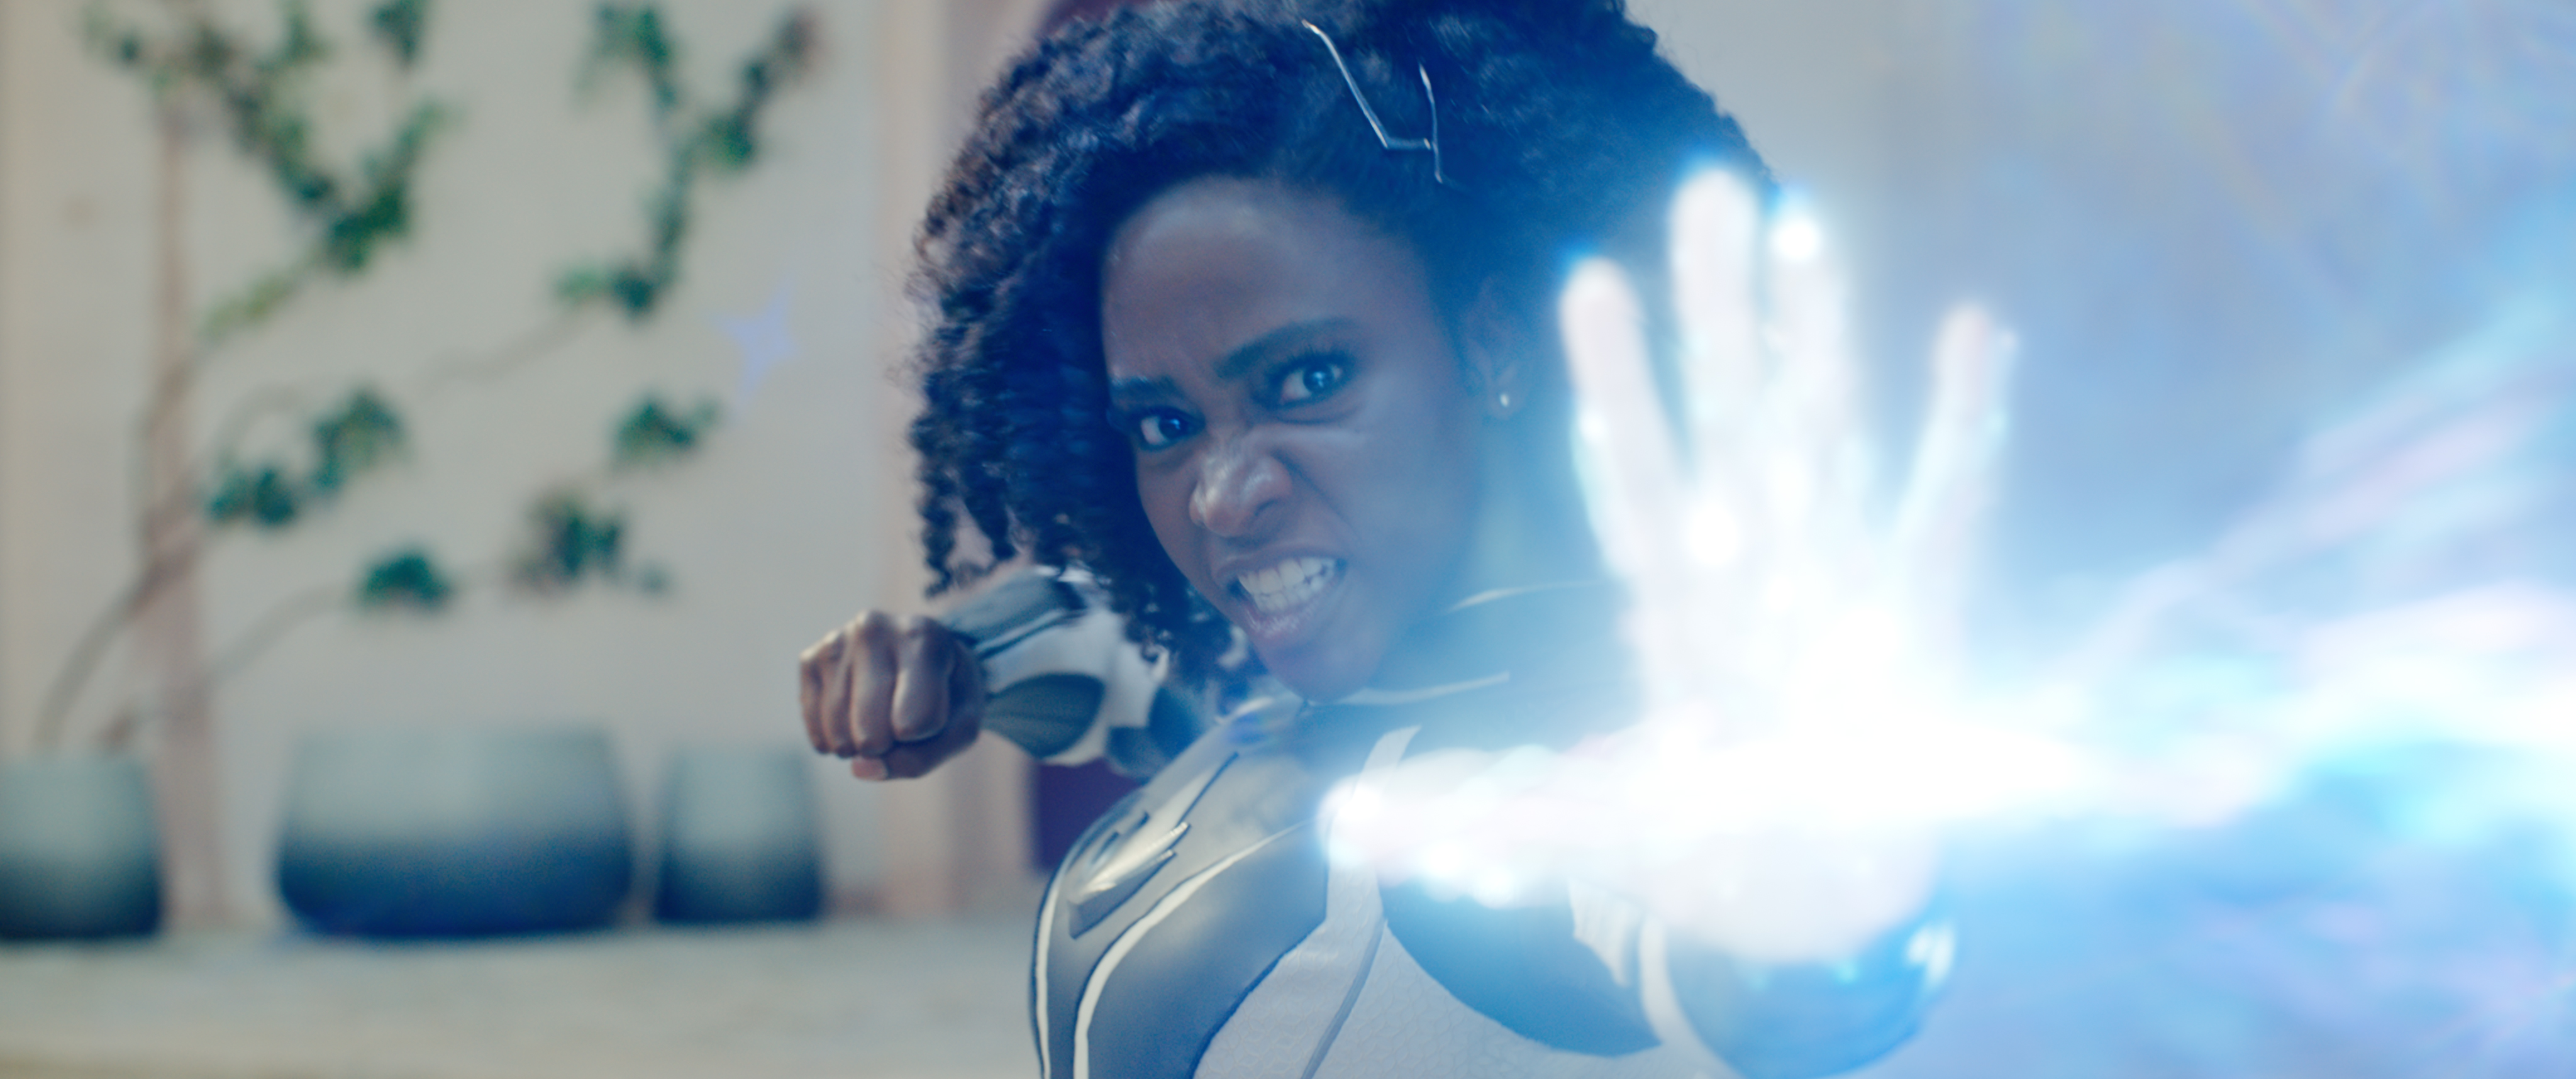 Teyonah Parris as Captain Monica Rambeau snarls as she blasts an offscreen foe with a white blast of glowing light in the Marvel Cinematic Universe movie The Marvels